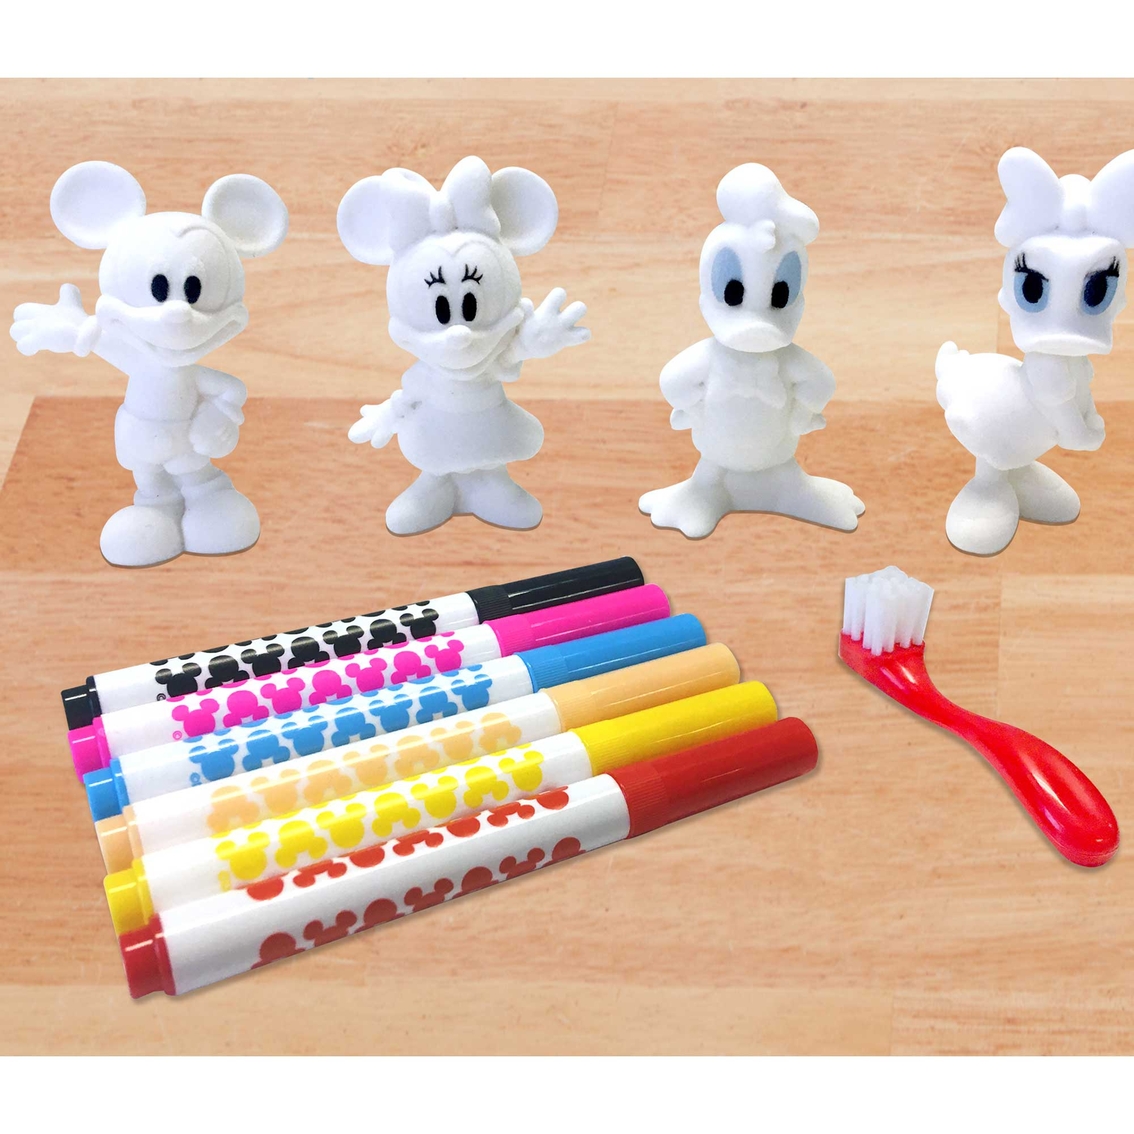 Cra-Z-Art Disney Mickey Mouse and Friends Color N' Recolor 3D Characters Set - Image 4 of 9